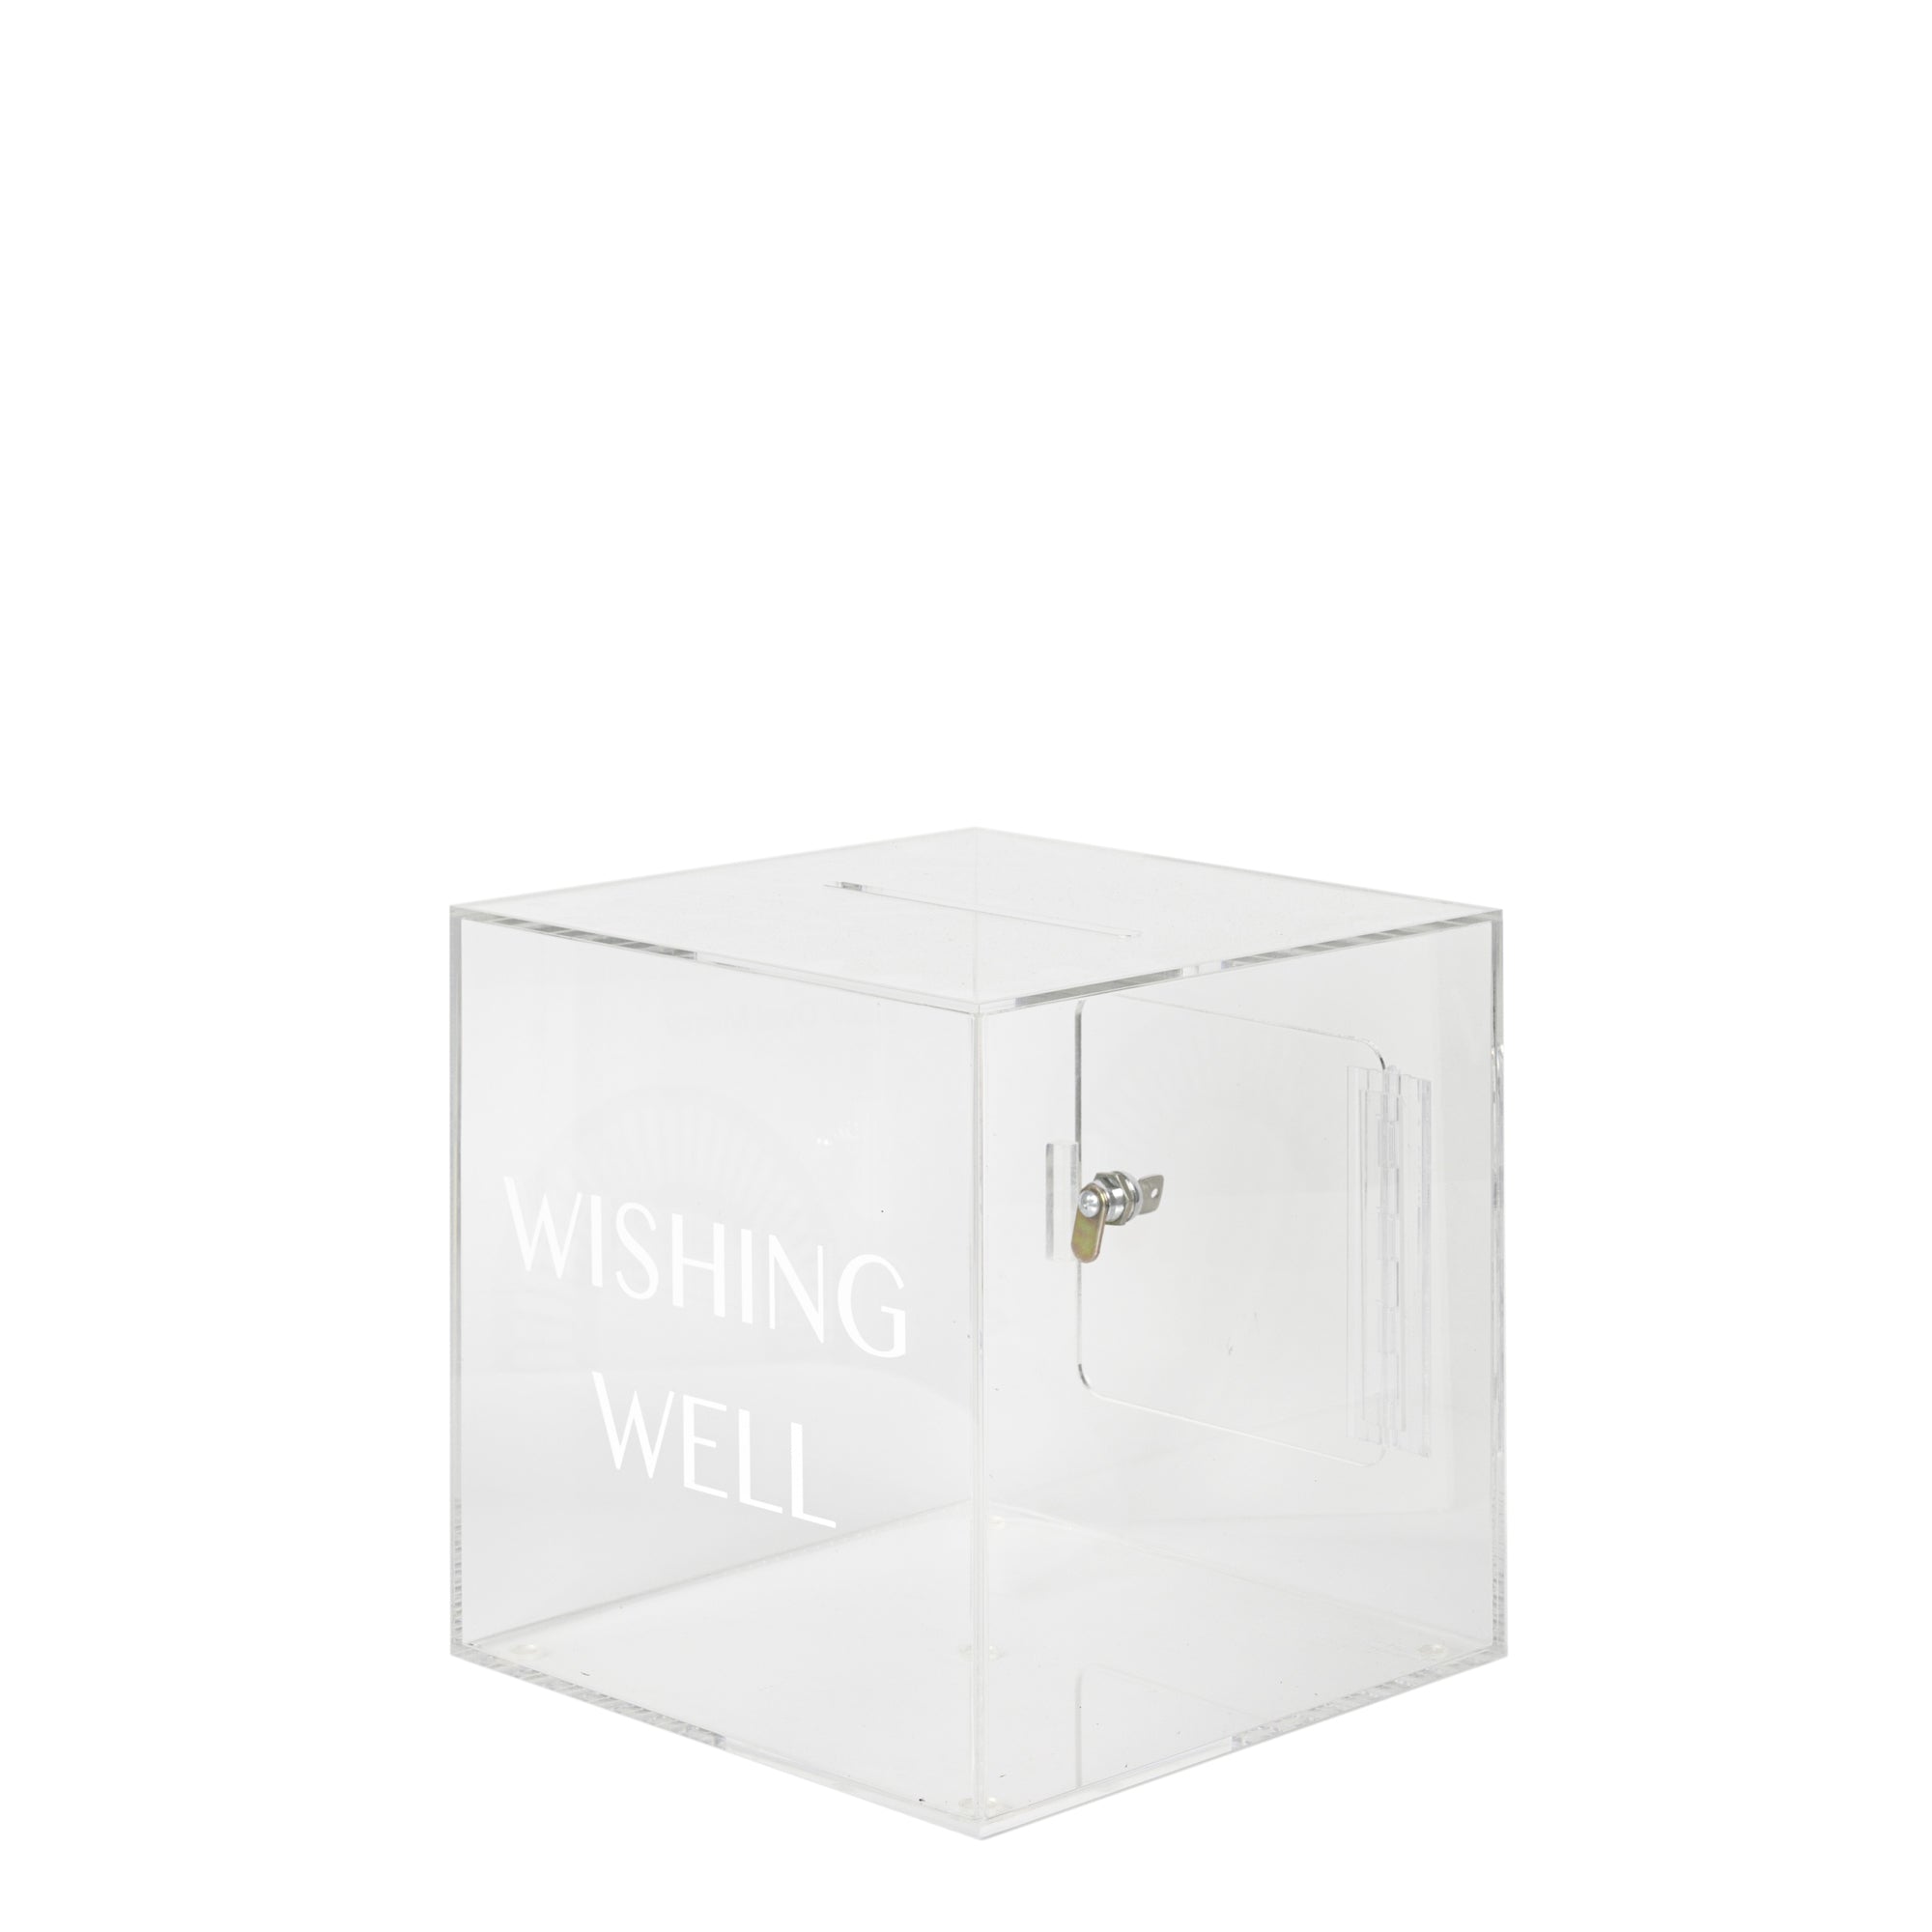 Acrylic Wishing Well For hire | For Love and Living Gold Coast, Brisbane, Byron Bay Wedding Hire